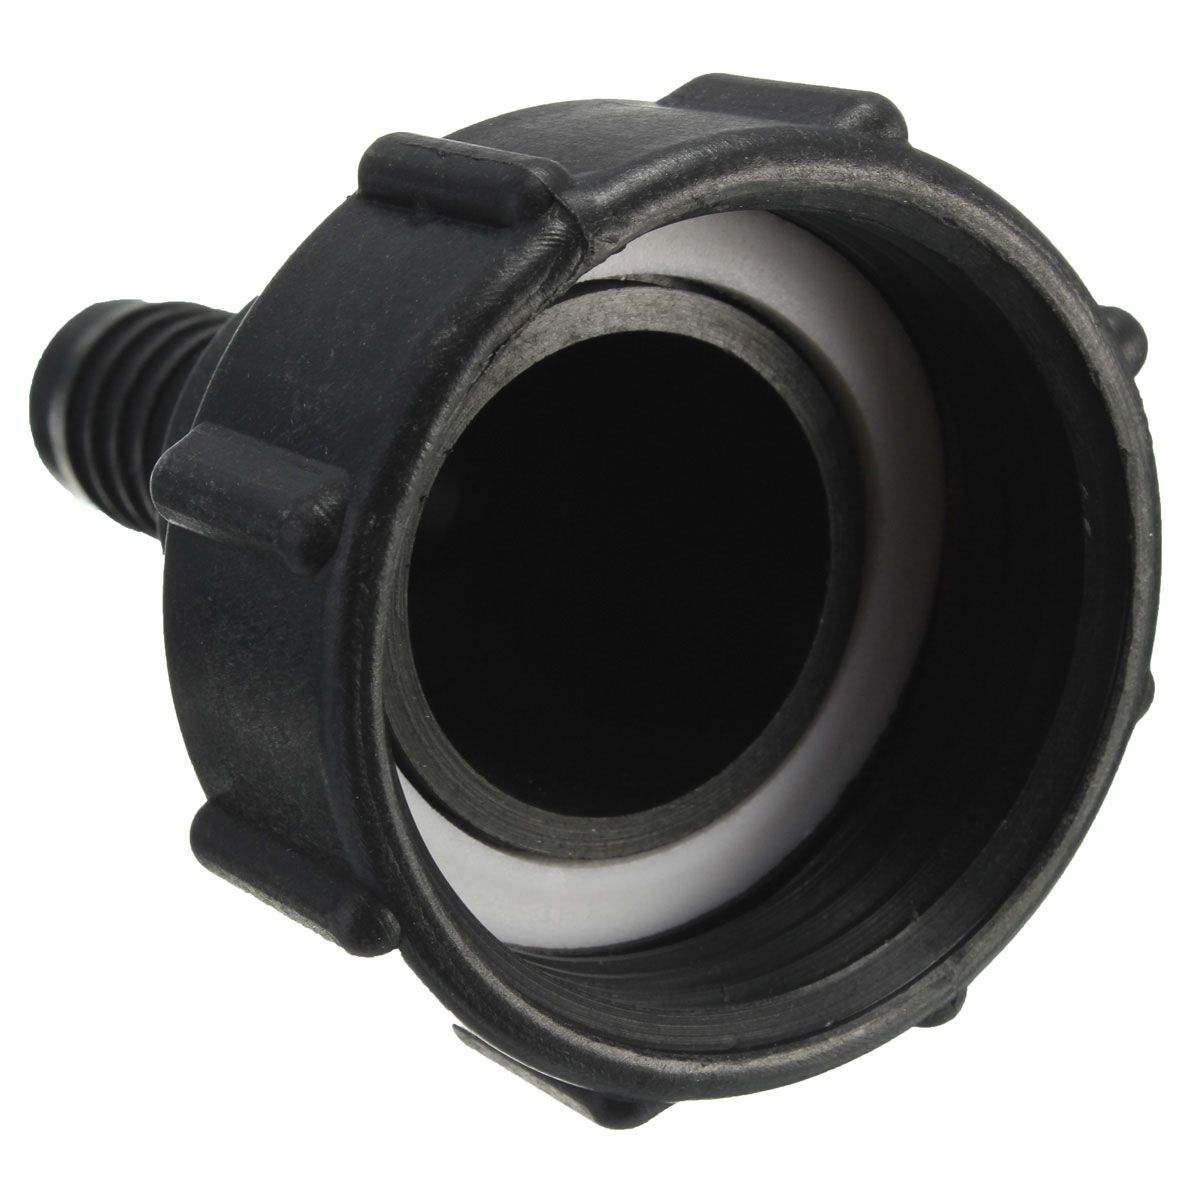 1000L-IBC-To-34-Inch-20MM-Water-Tank-Black-Garden-Hose-Adapter-Fitting-Tool-978481